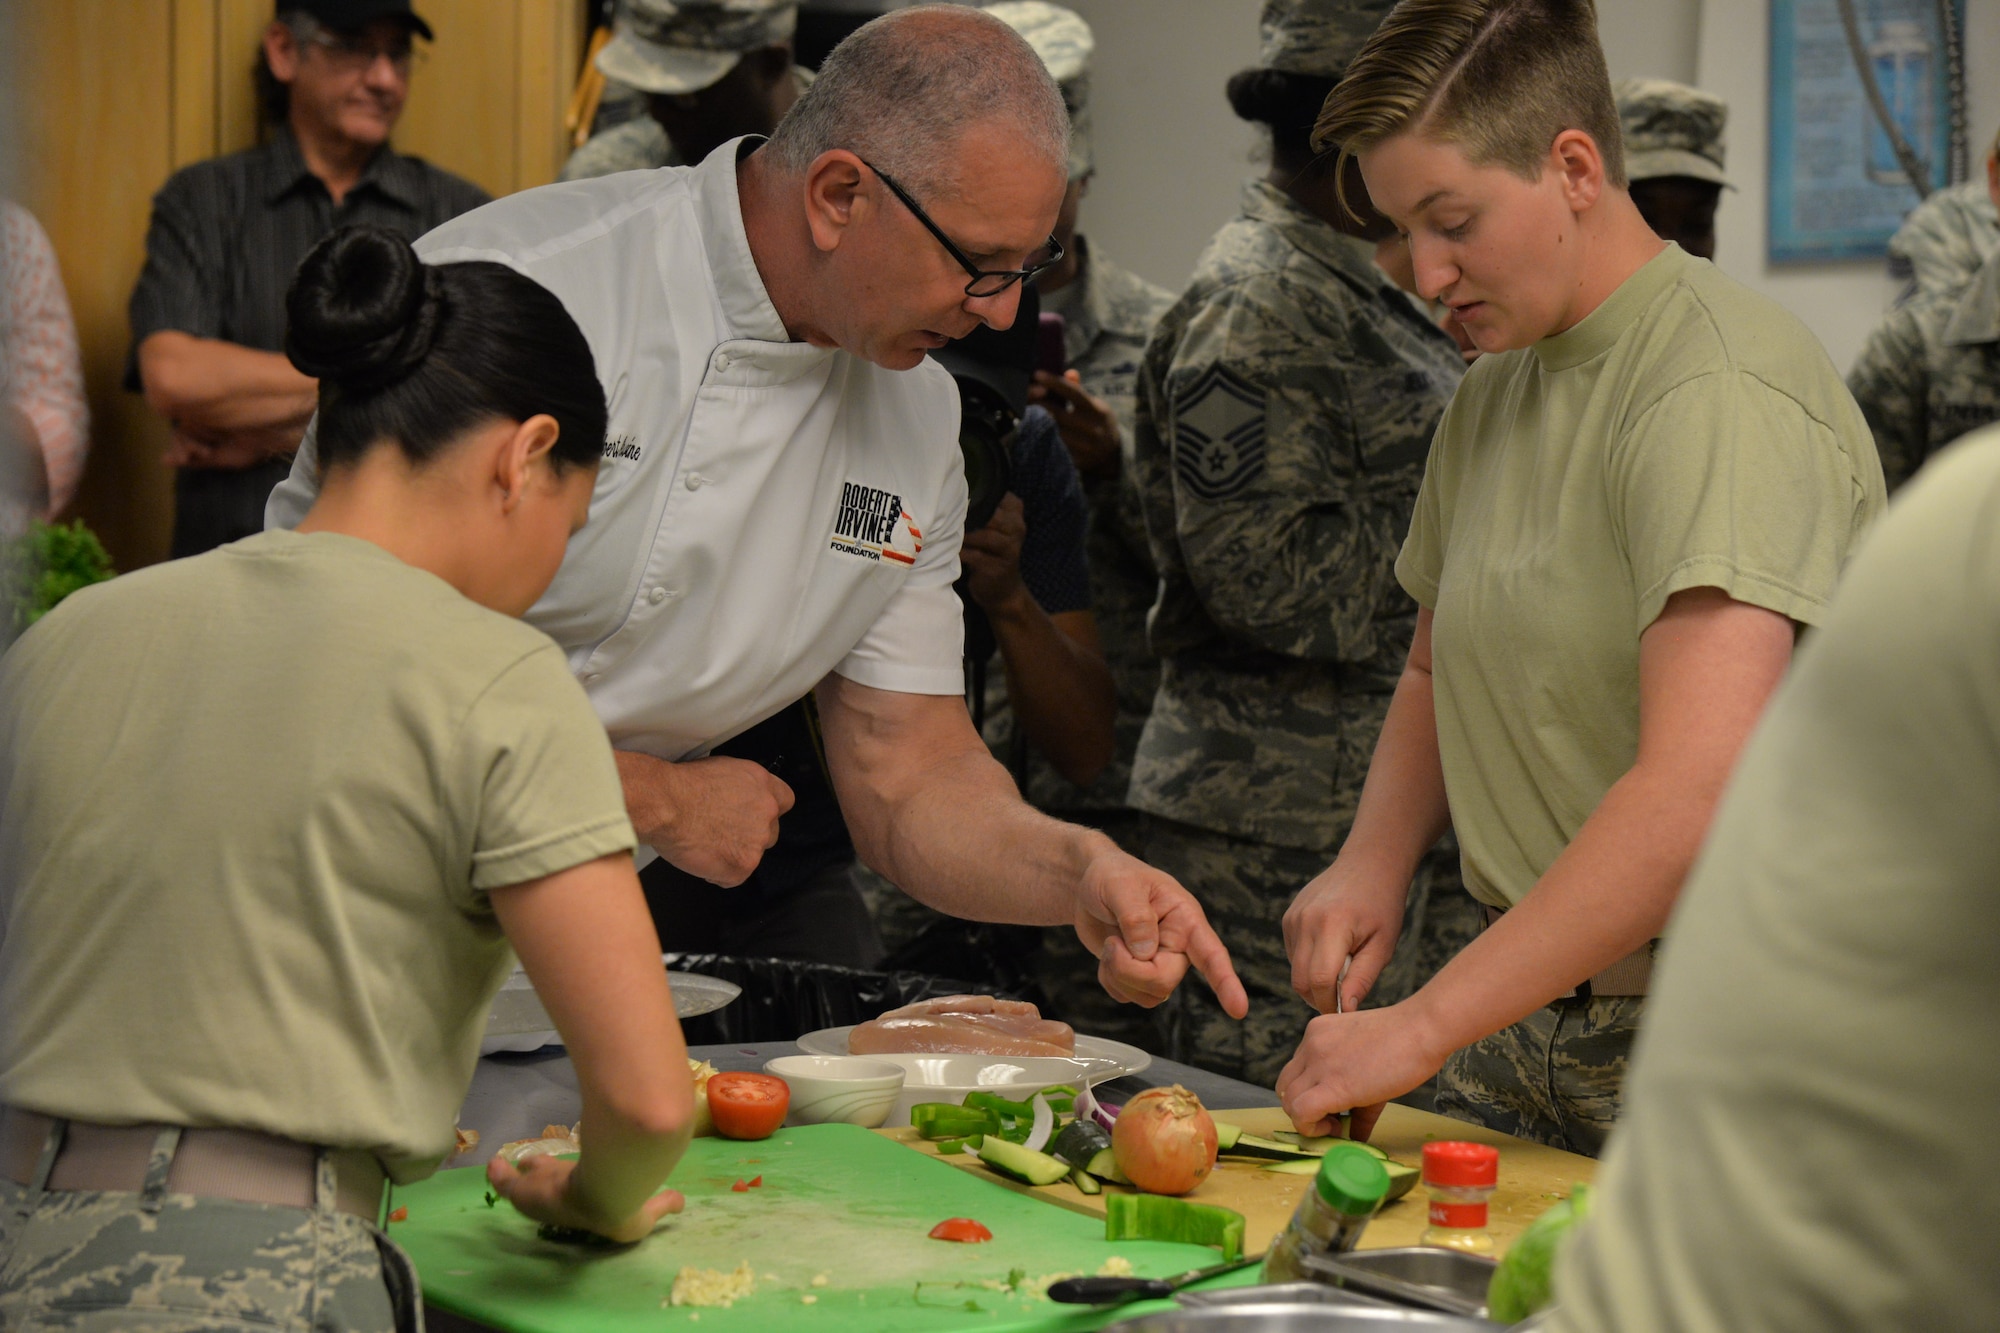 Celebrity Chef Robert Irvine assists Senior Airman Secilia Peraza, left, and Airman First Class Candance Ellenurg, both 90th Force Support Squadron missile field chefs, by coaching them as they prepare their individual dishes during a Warrior Chef Competition Sept. 7, 2017, at Malmstrom Air Force Base, Mont. Chef Irvine was a mentor and a judge for the competition.  (U.S. Air Force phot/Airman First Class Daniel Brosam)